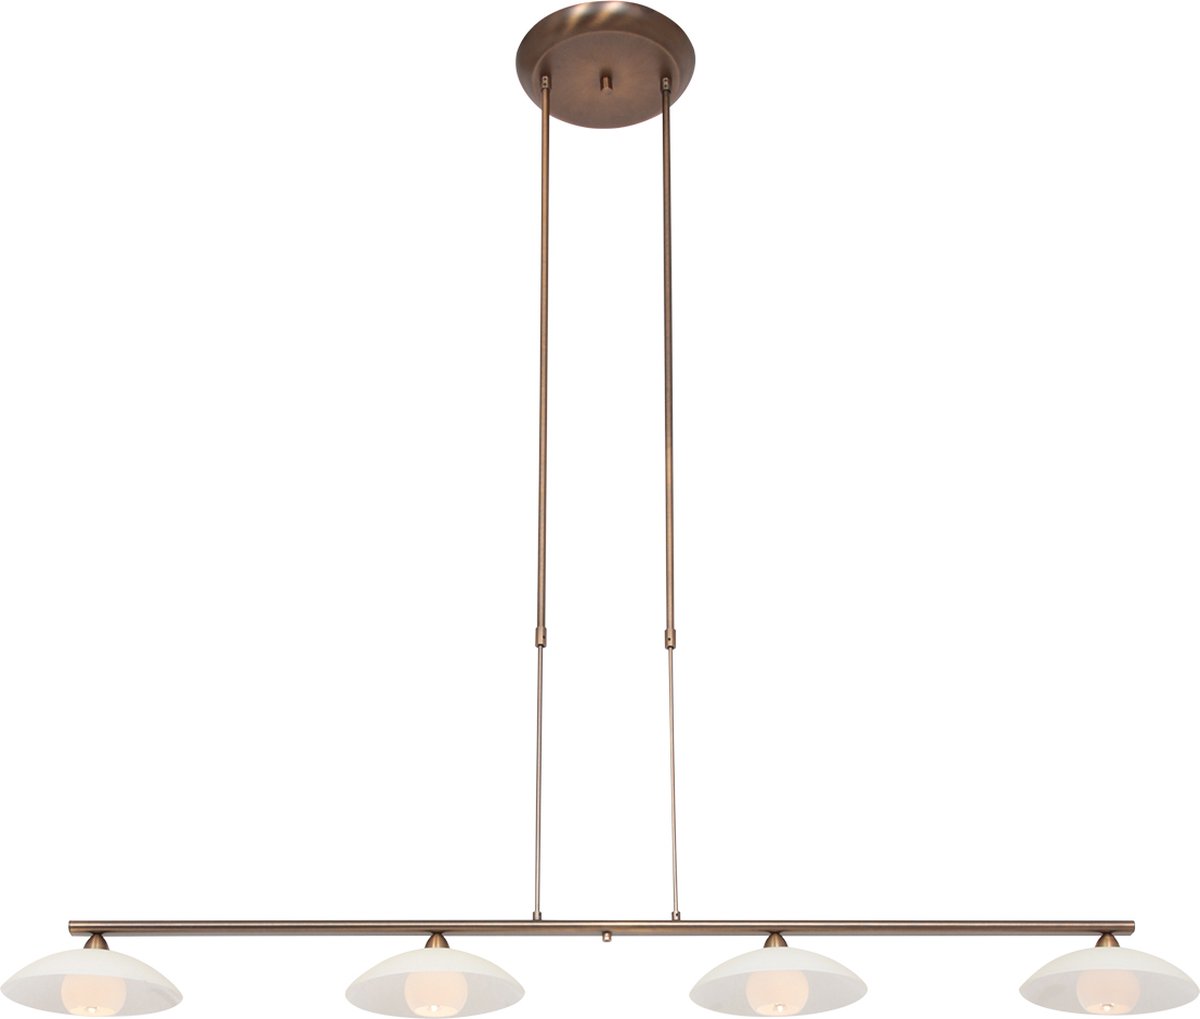 Steinhauer Hanglamp Sovereign Classic Led 2743br Brons